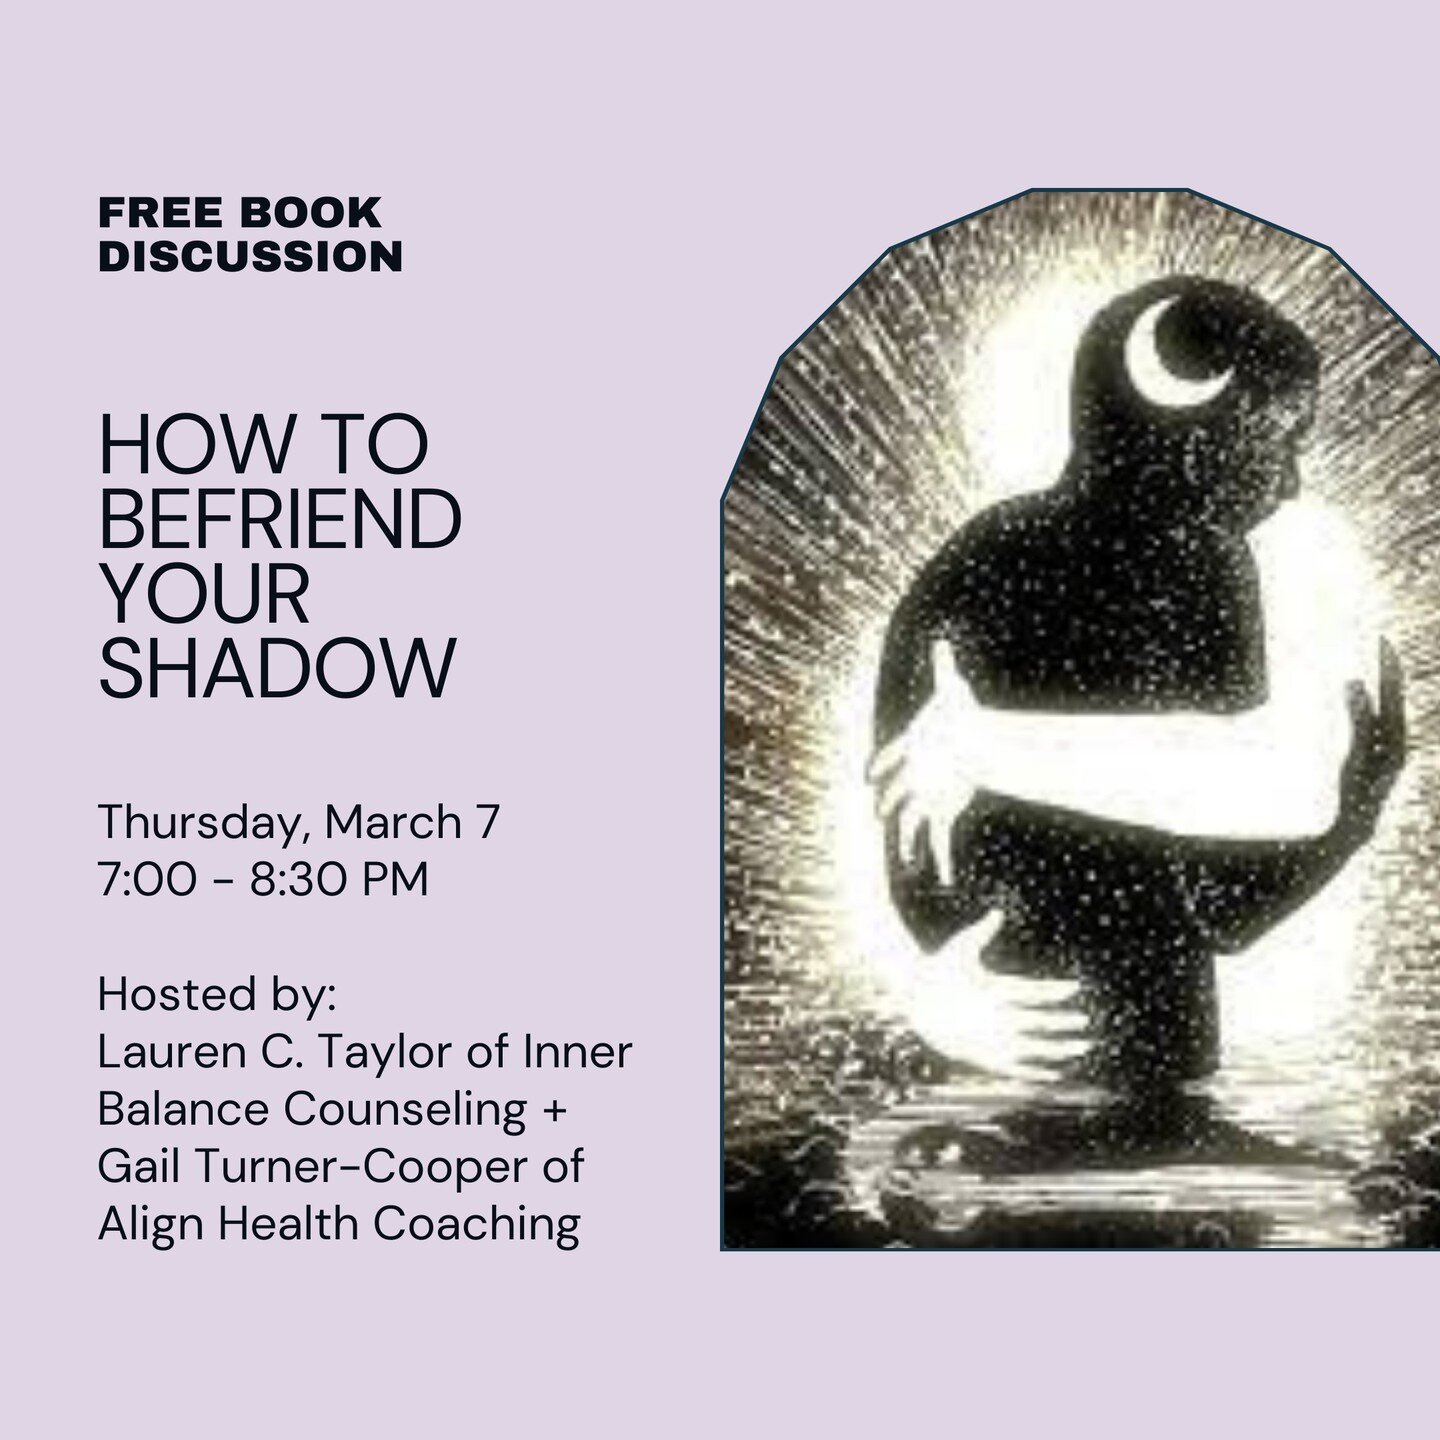 It's not too late to join us for our book discussion this Thursday, 3/7, at 7 pm! Whether or not you've read the book, it should be an illuminating conversation as we dive into shadow work together. RSVP to info@innerbalancecounseling.com.